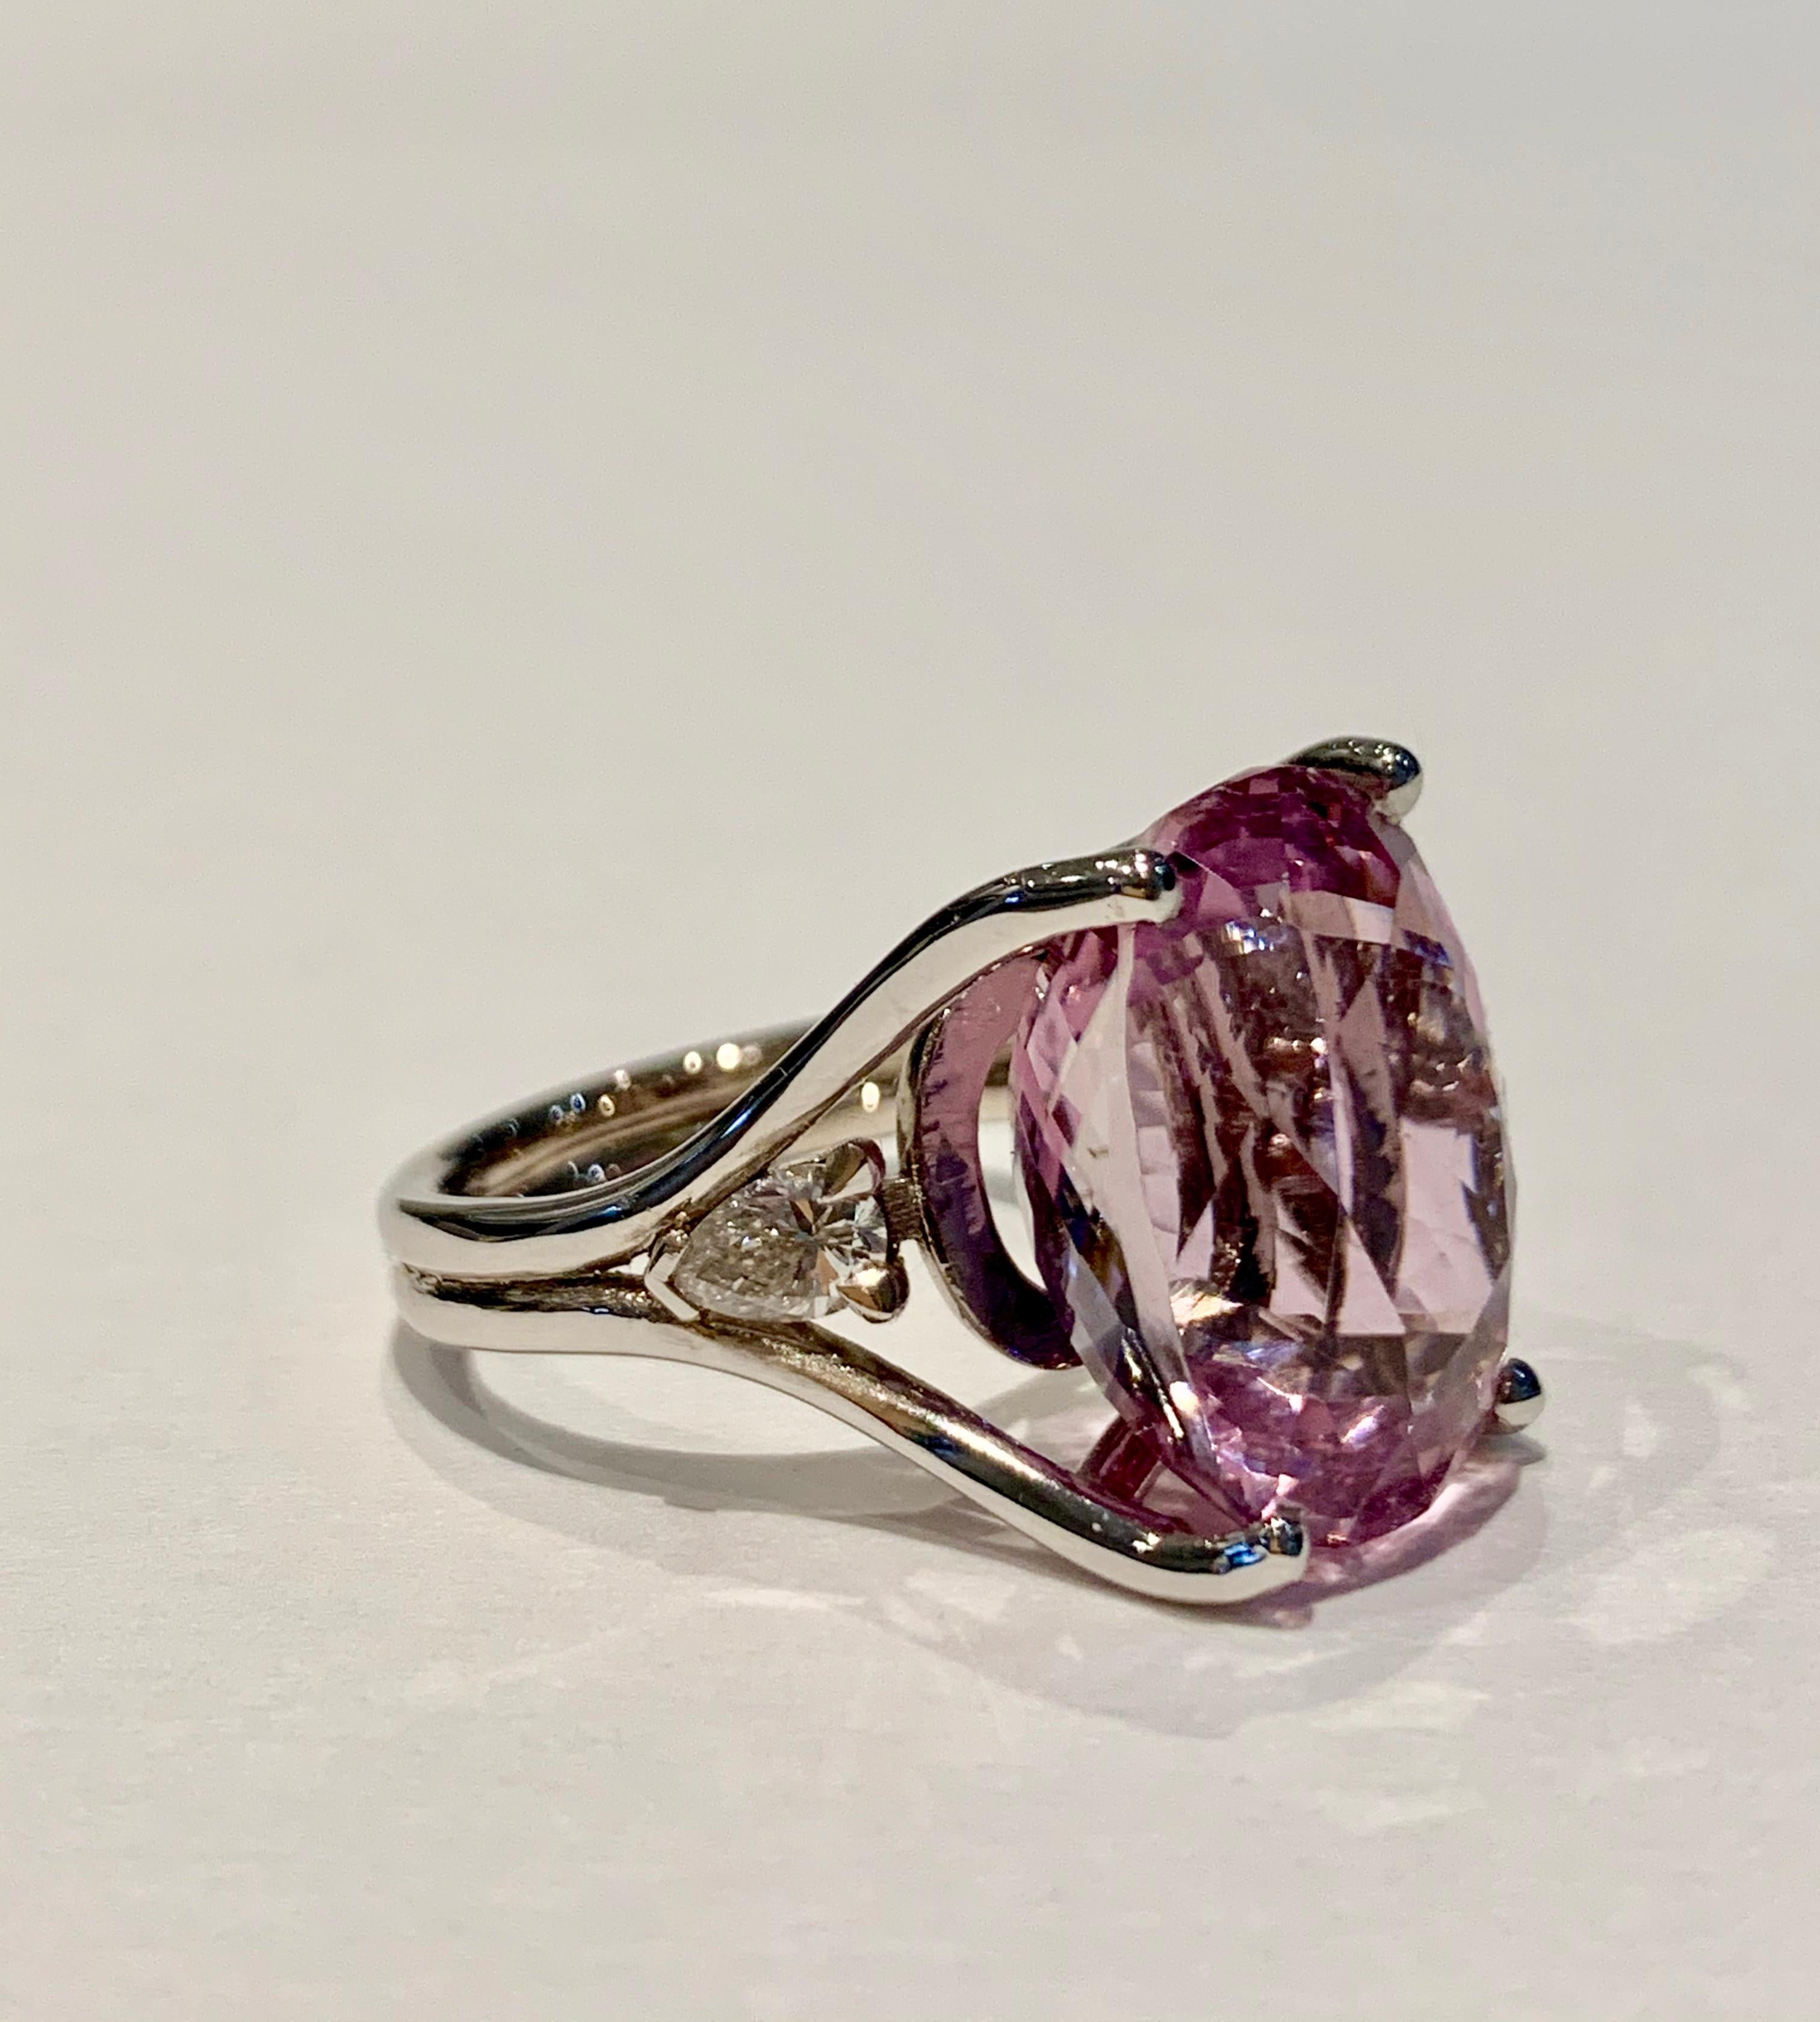 Bespoke 18 Carat Pink Oval Kunzite and Diamond Ring in 18 Carat White Gold For Sale 1